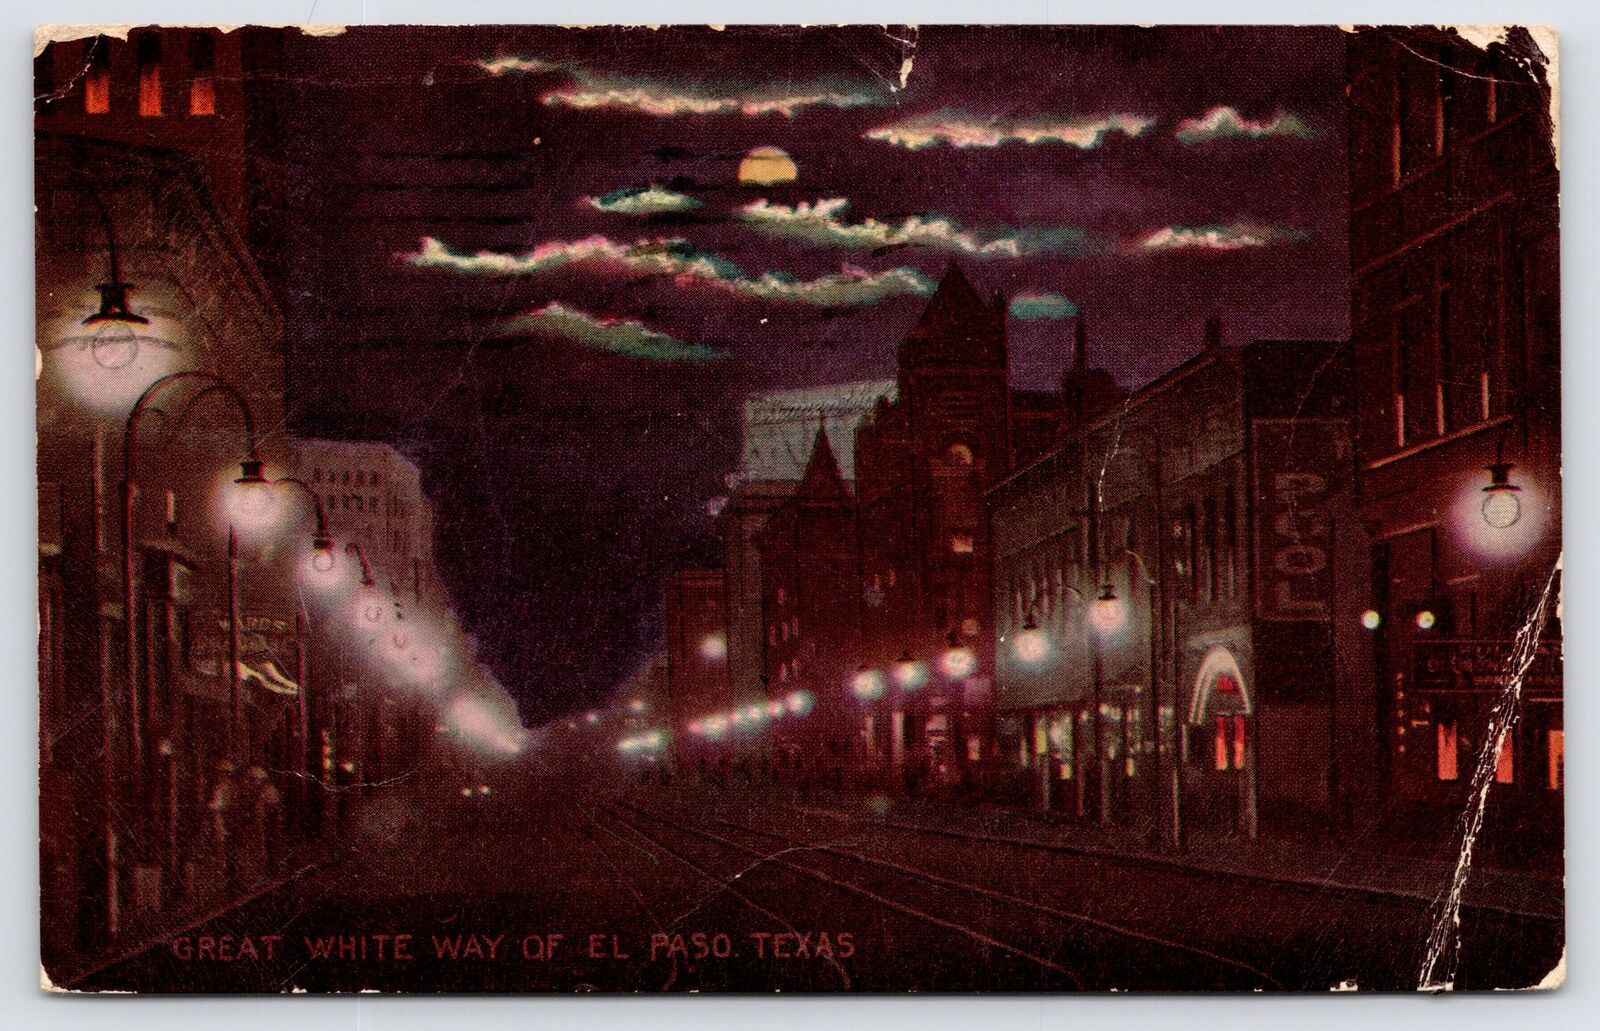 El Paso TX Wards, Pool Hall~Great White Way Under Moonlight in the Clouds~1911